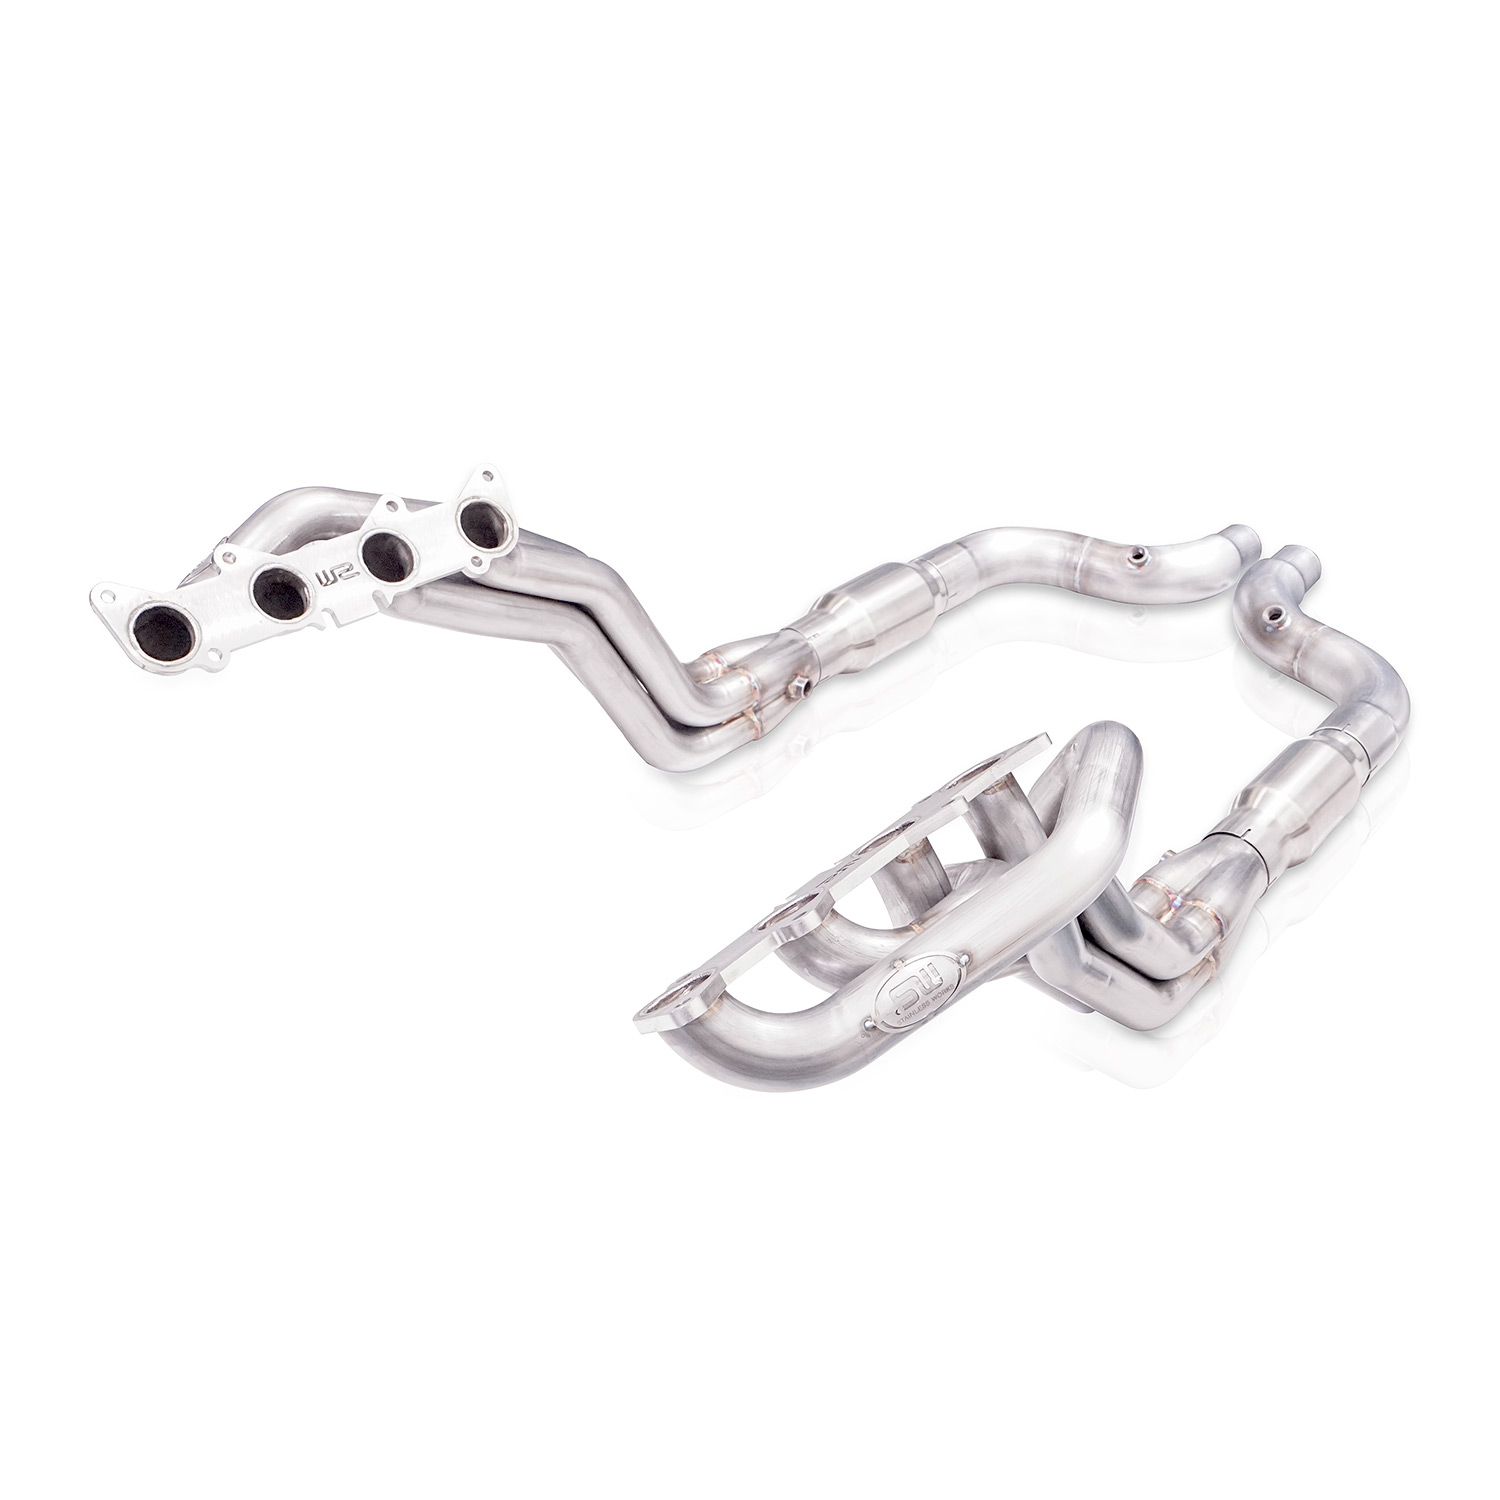 2015-2020 Mustang Shelby GT350 5.2L, 2015-2020 Mustang GT350R 5.2L SW Headers 1-7/8" With Catted Leads Factory Connect